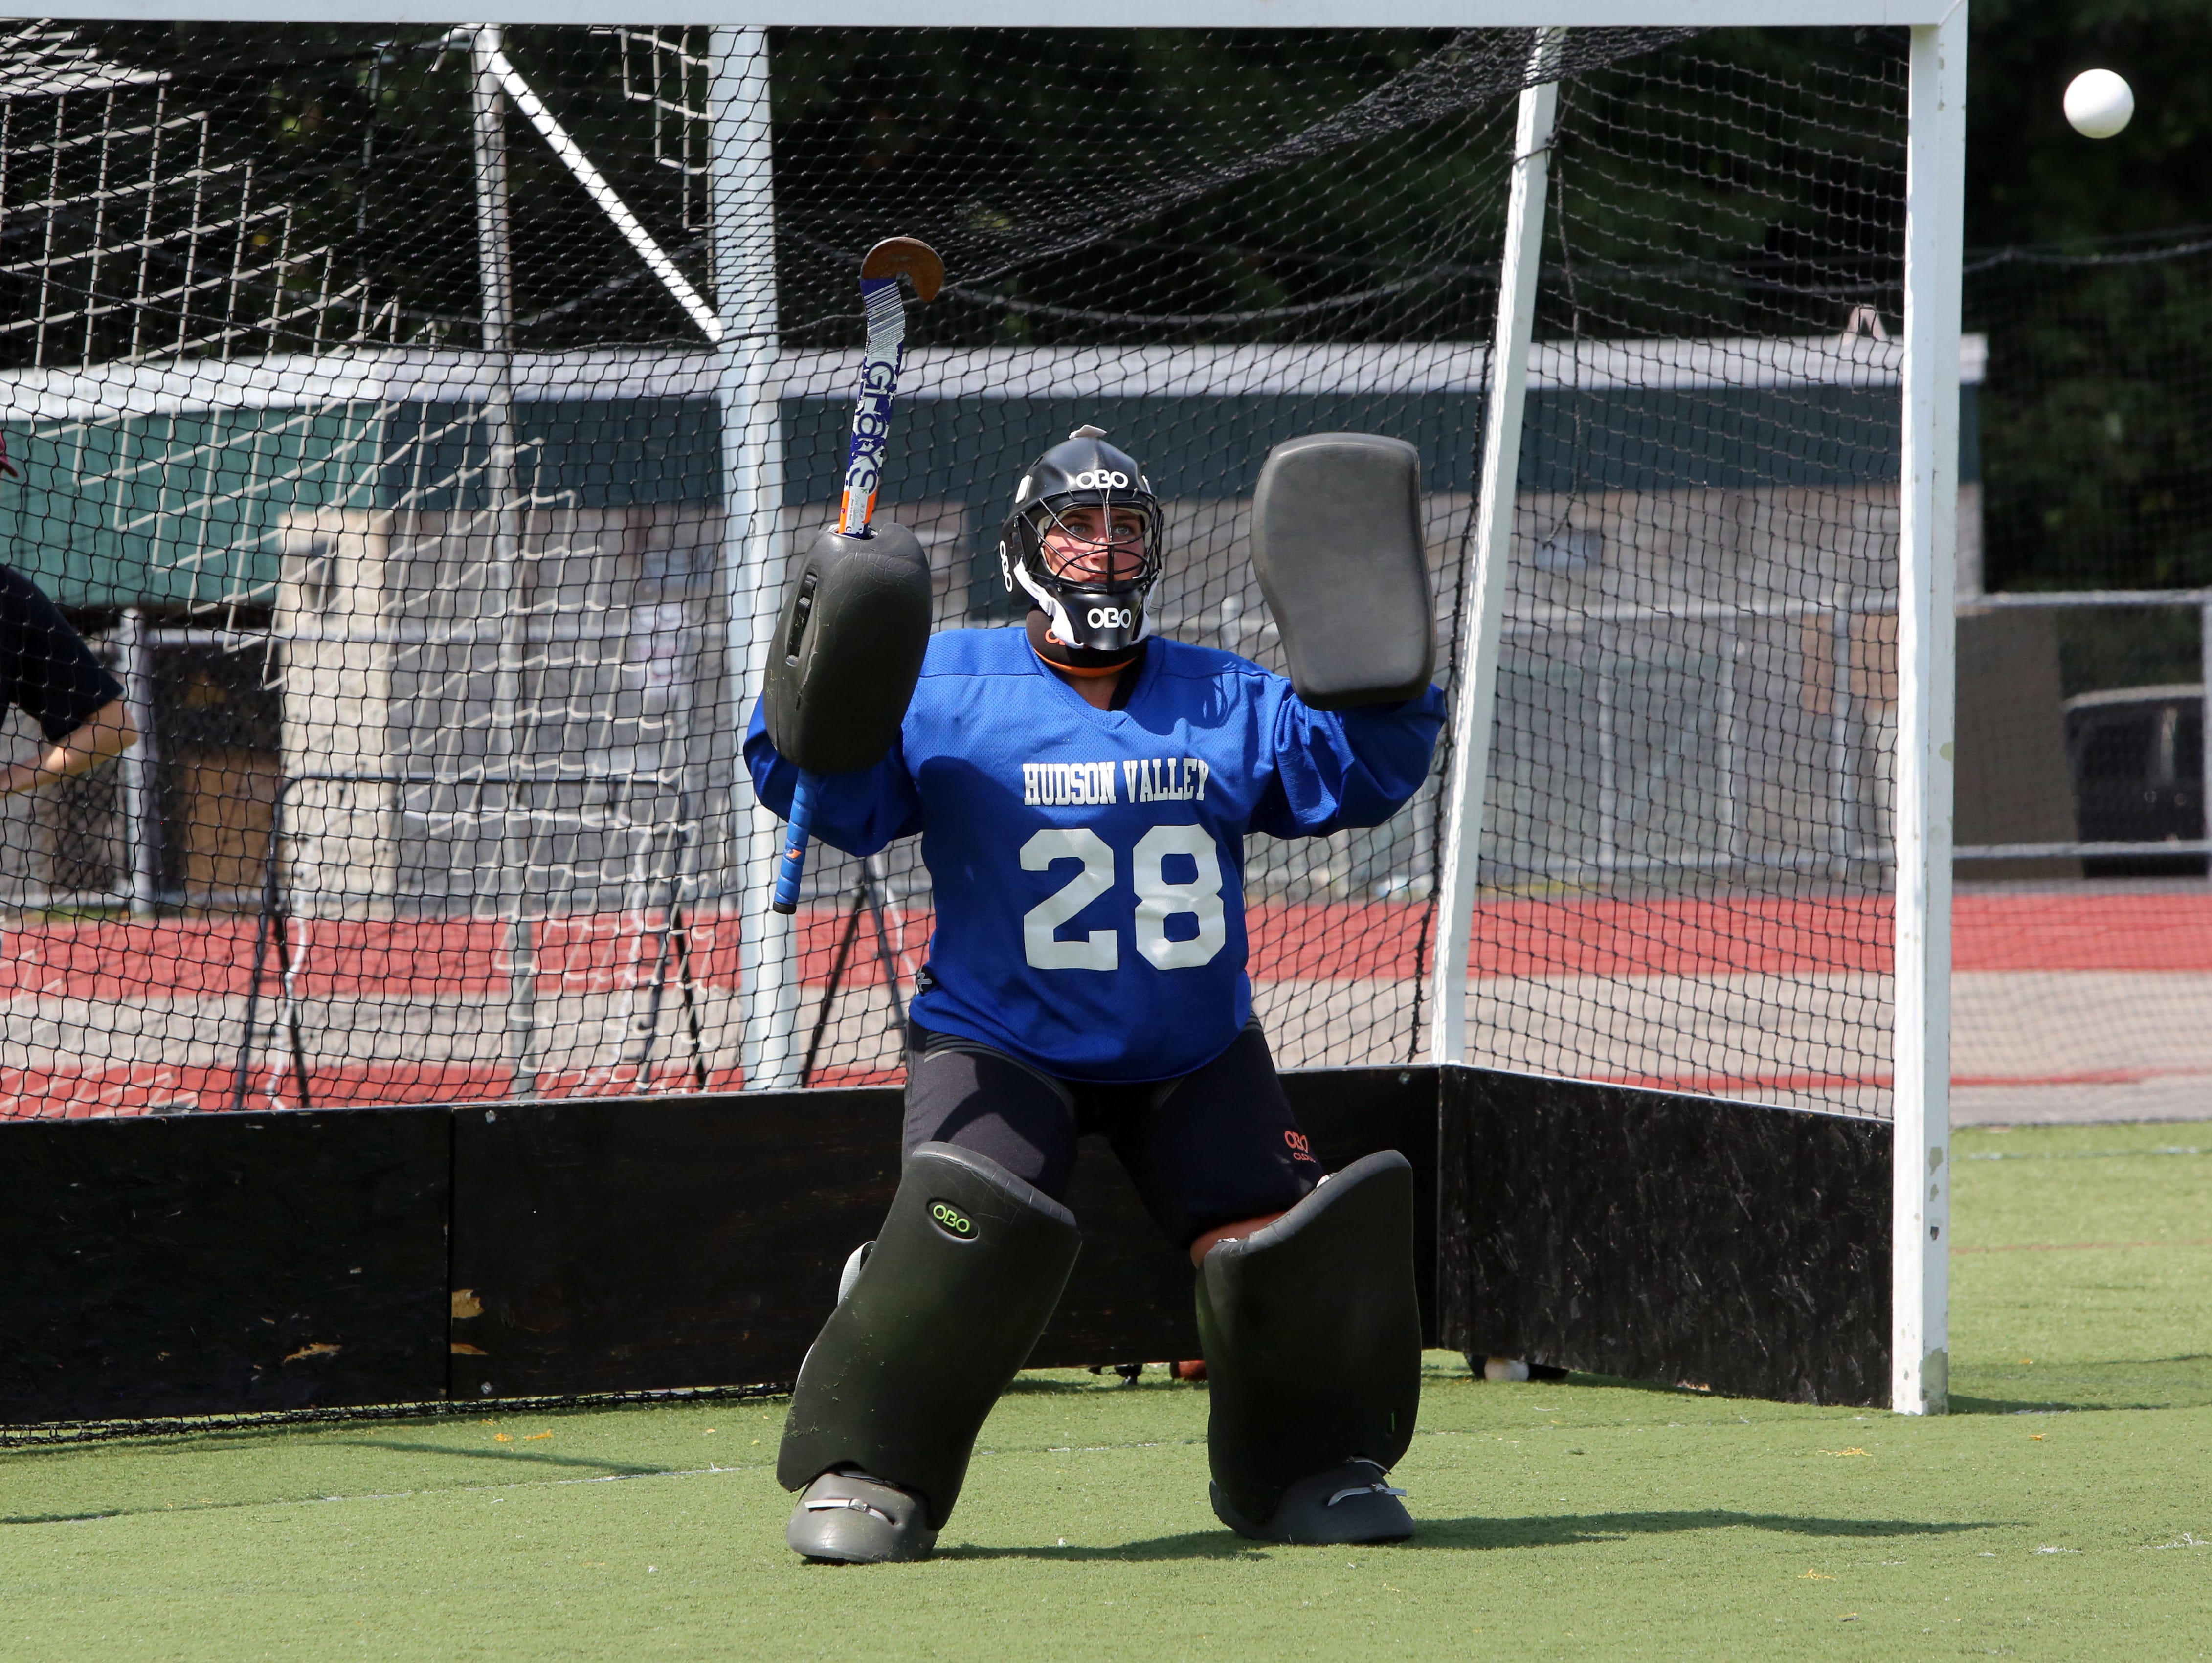 So who wants to be a field hockey goalie? USA TODAY High School Sports